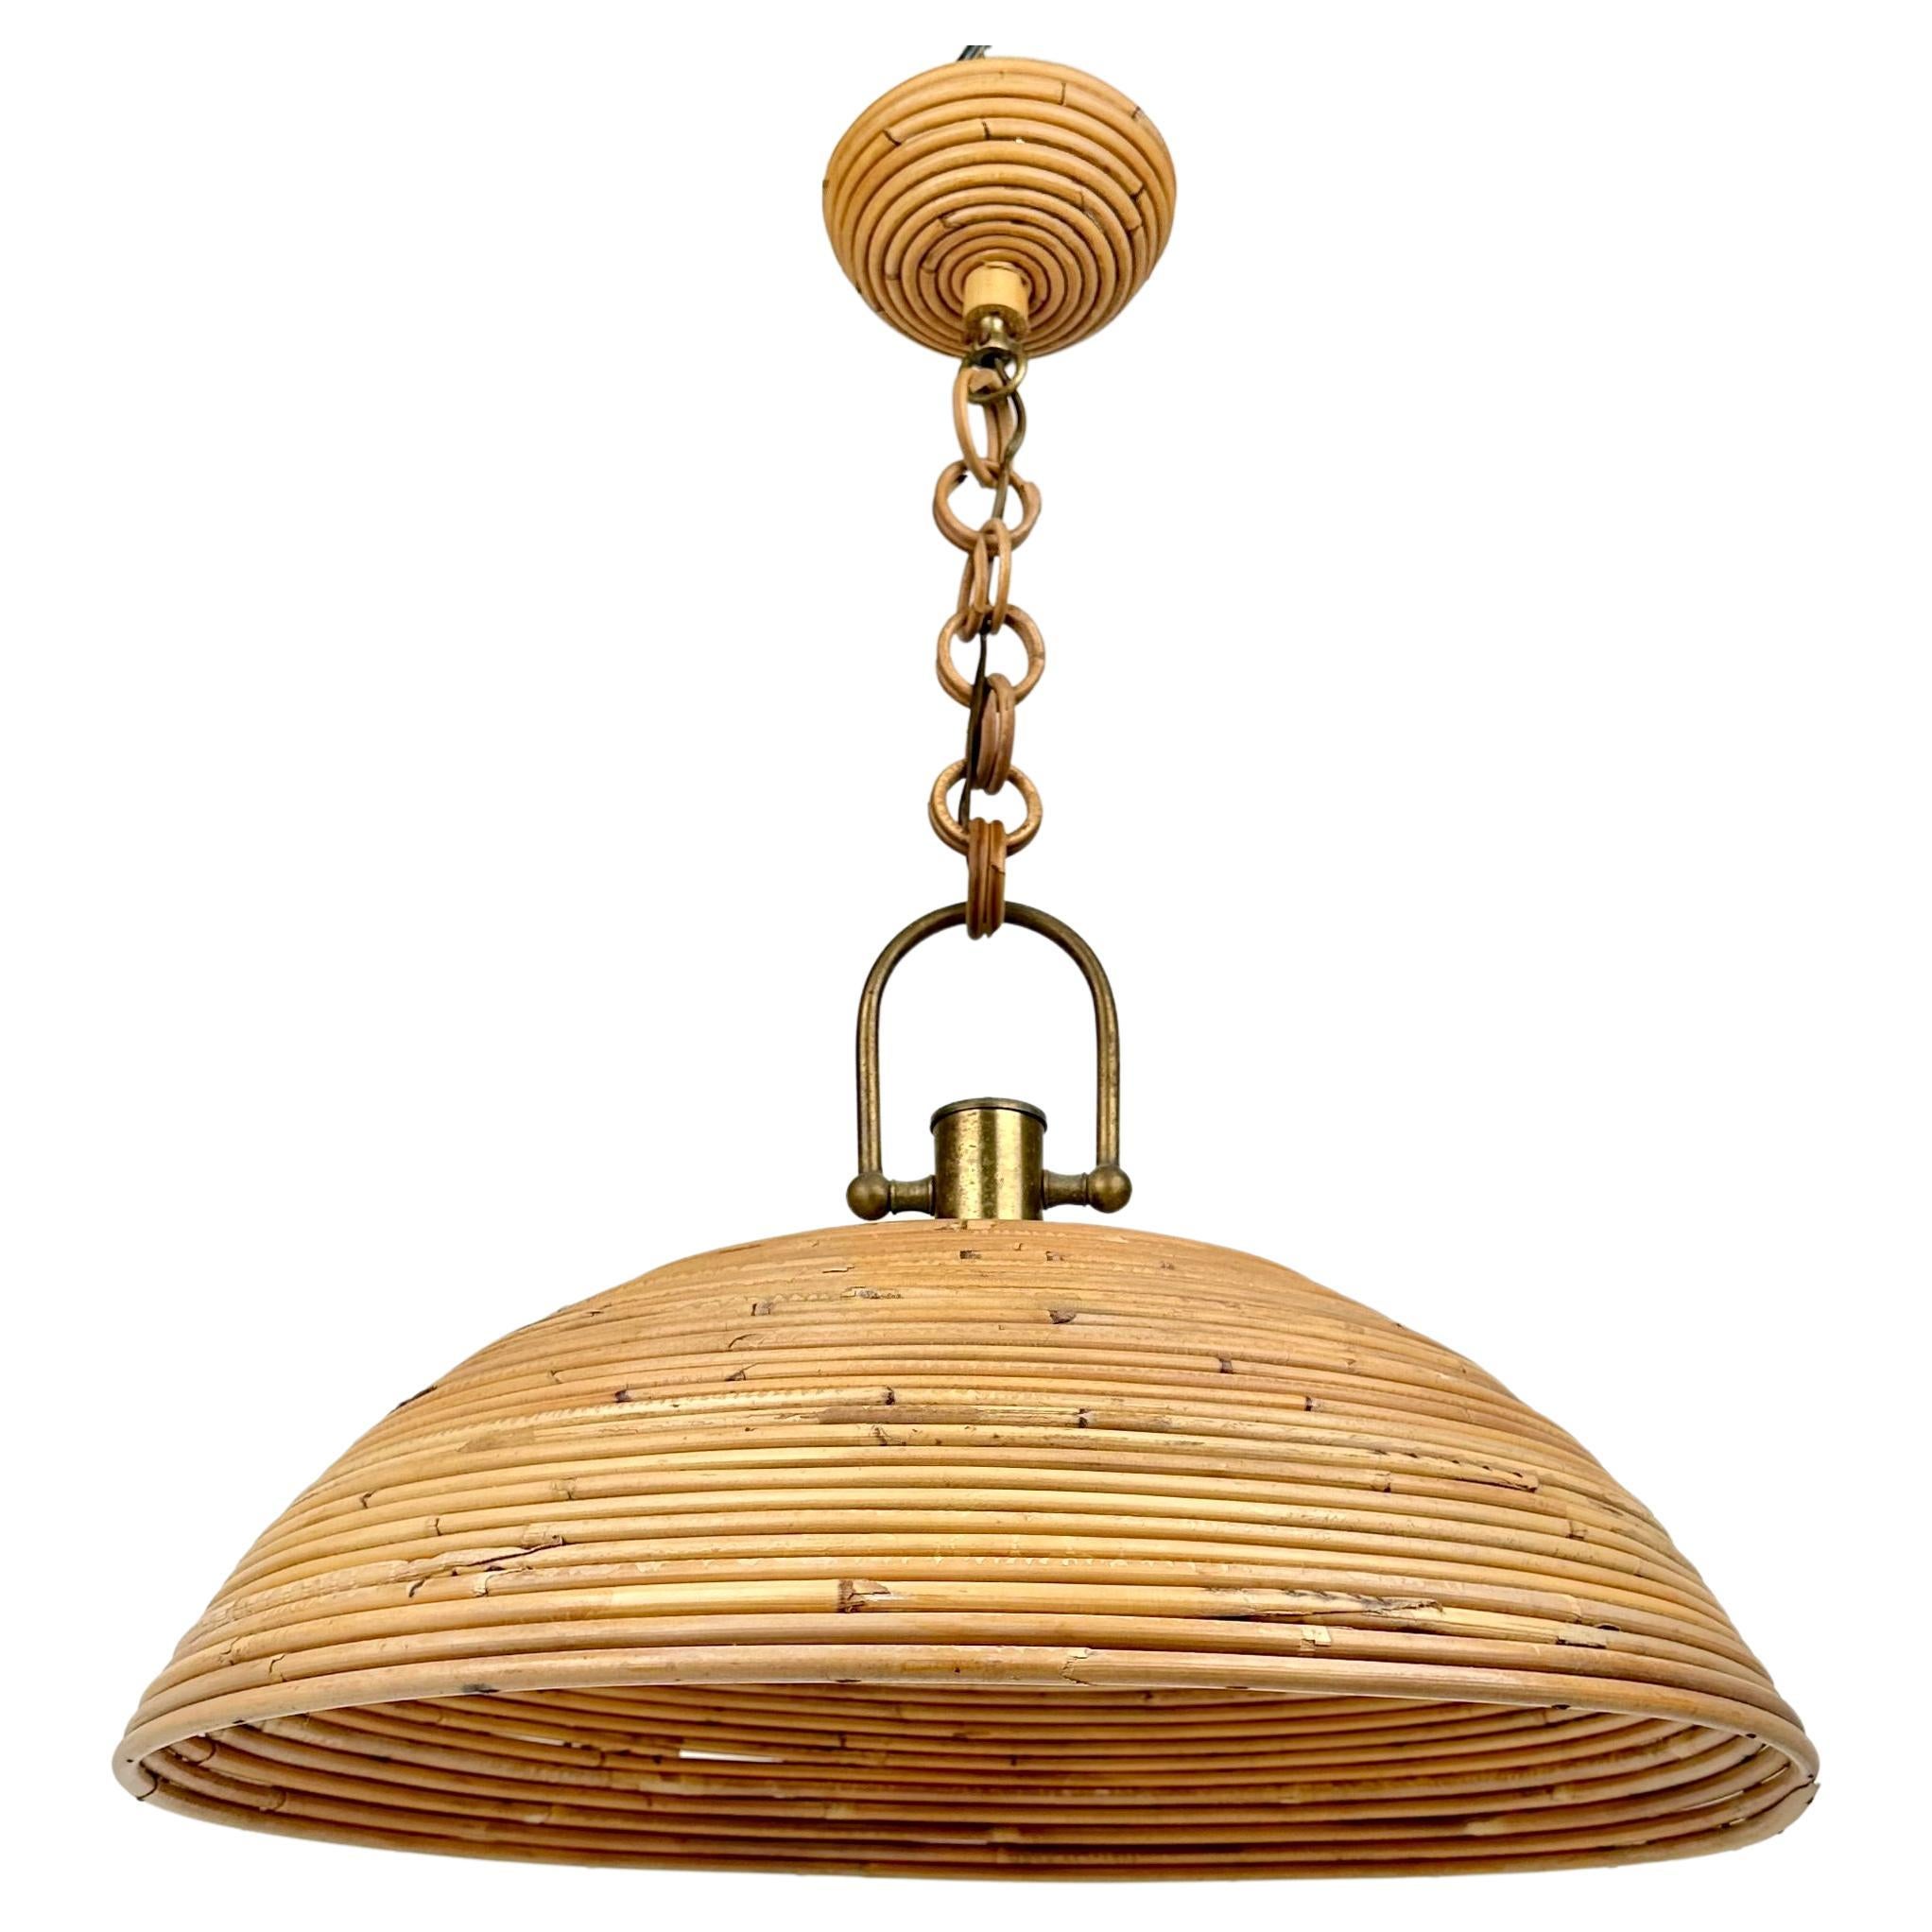 Midcentury Vivai Del Sud Rattan and Brass Chandelier Pendant, Italy, 1960s